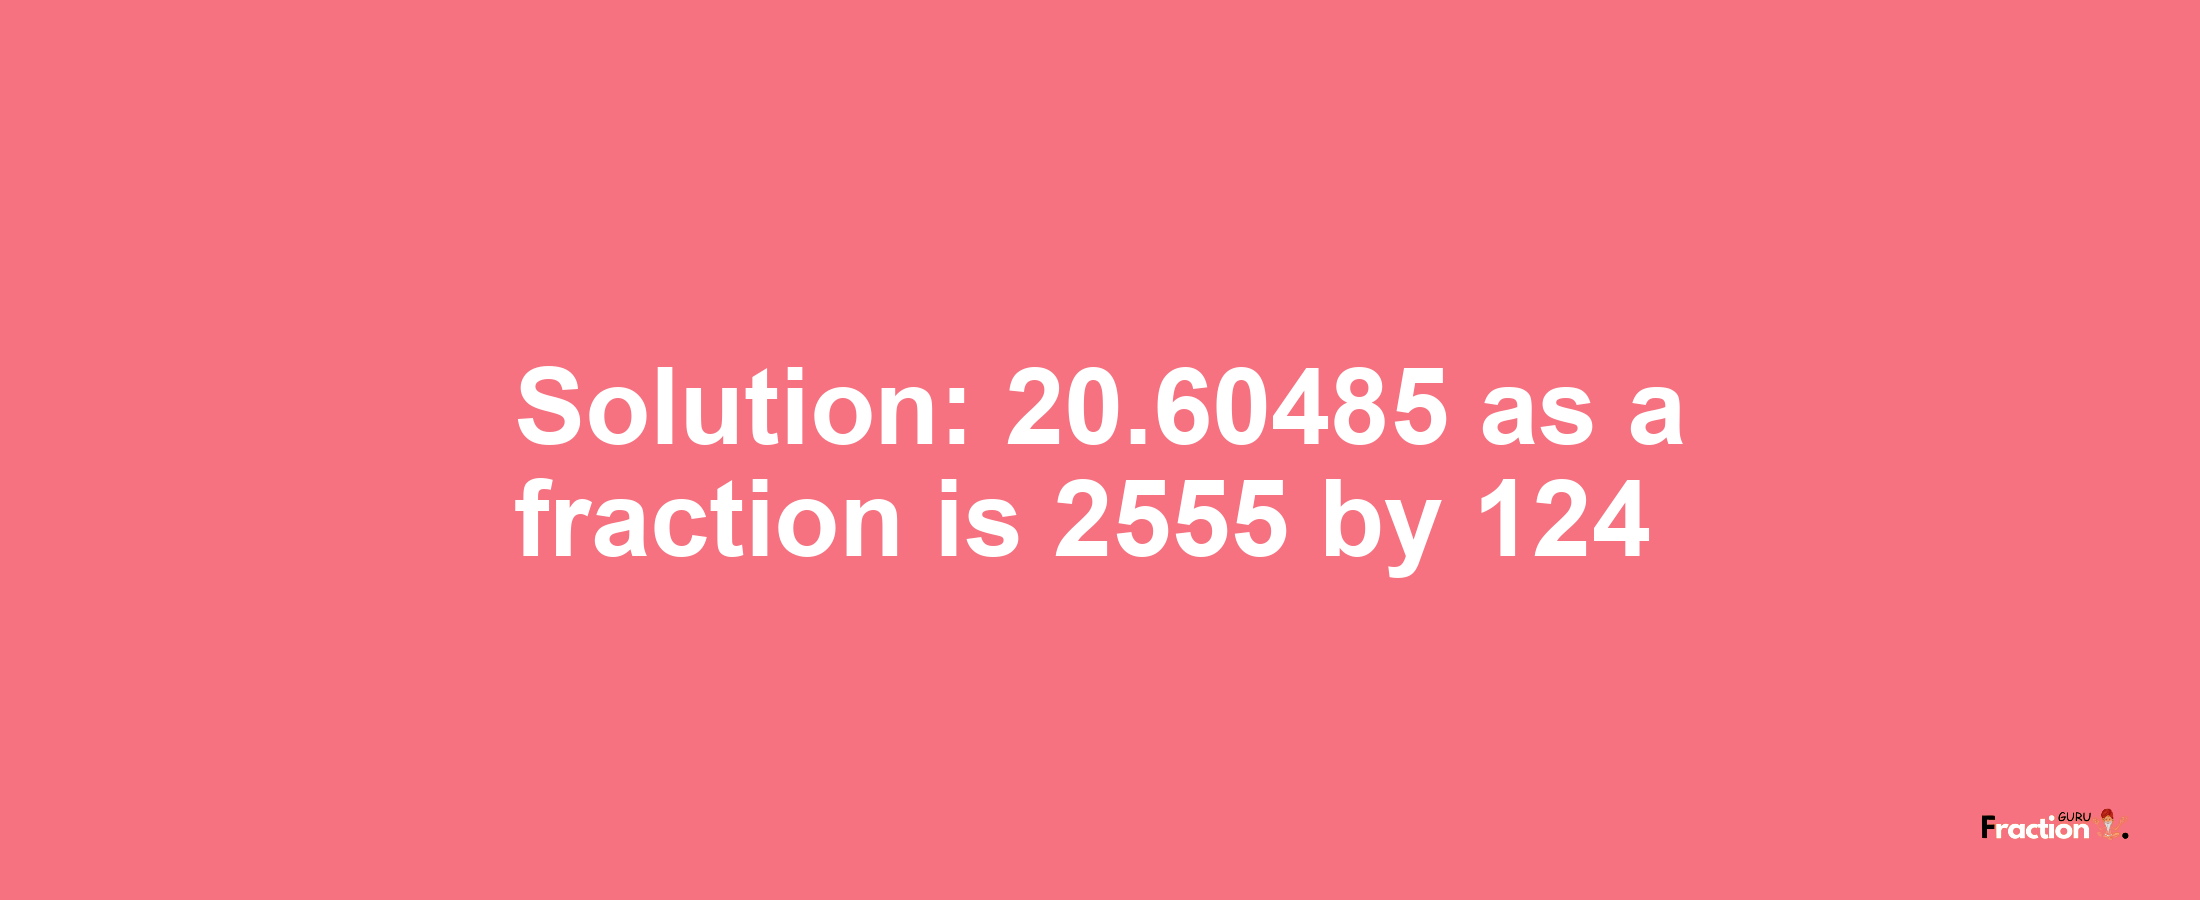 Solution:20.60485 as a fraction is 2555/124